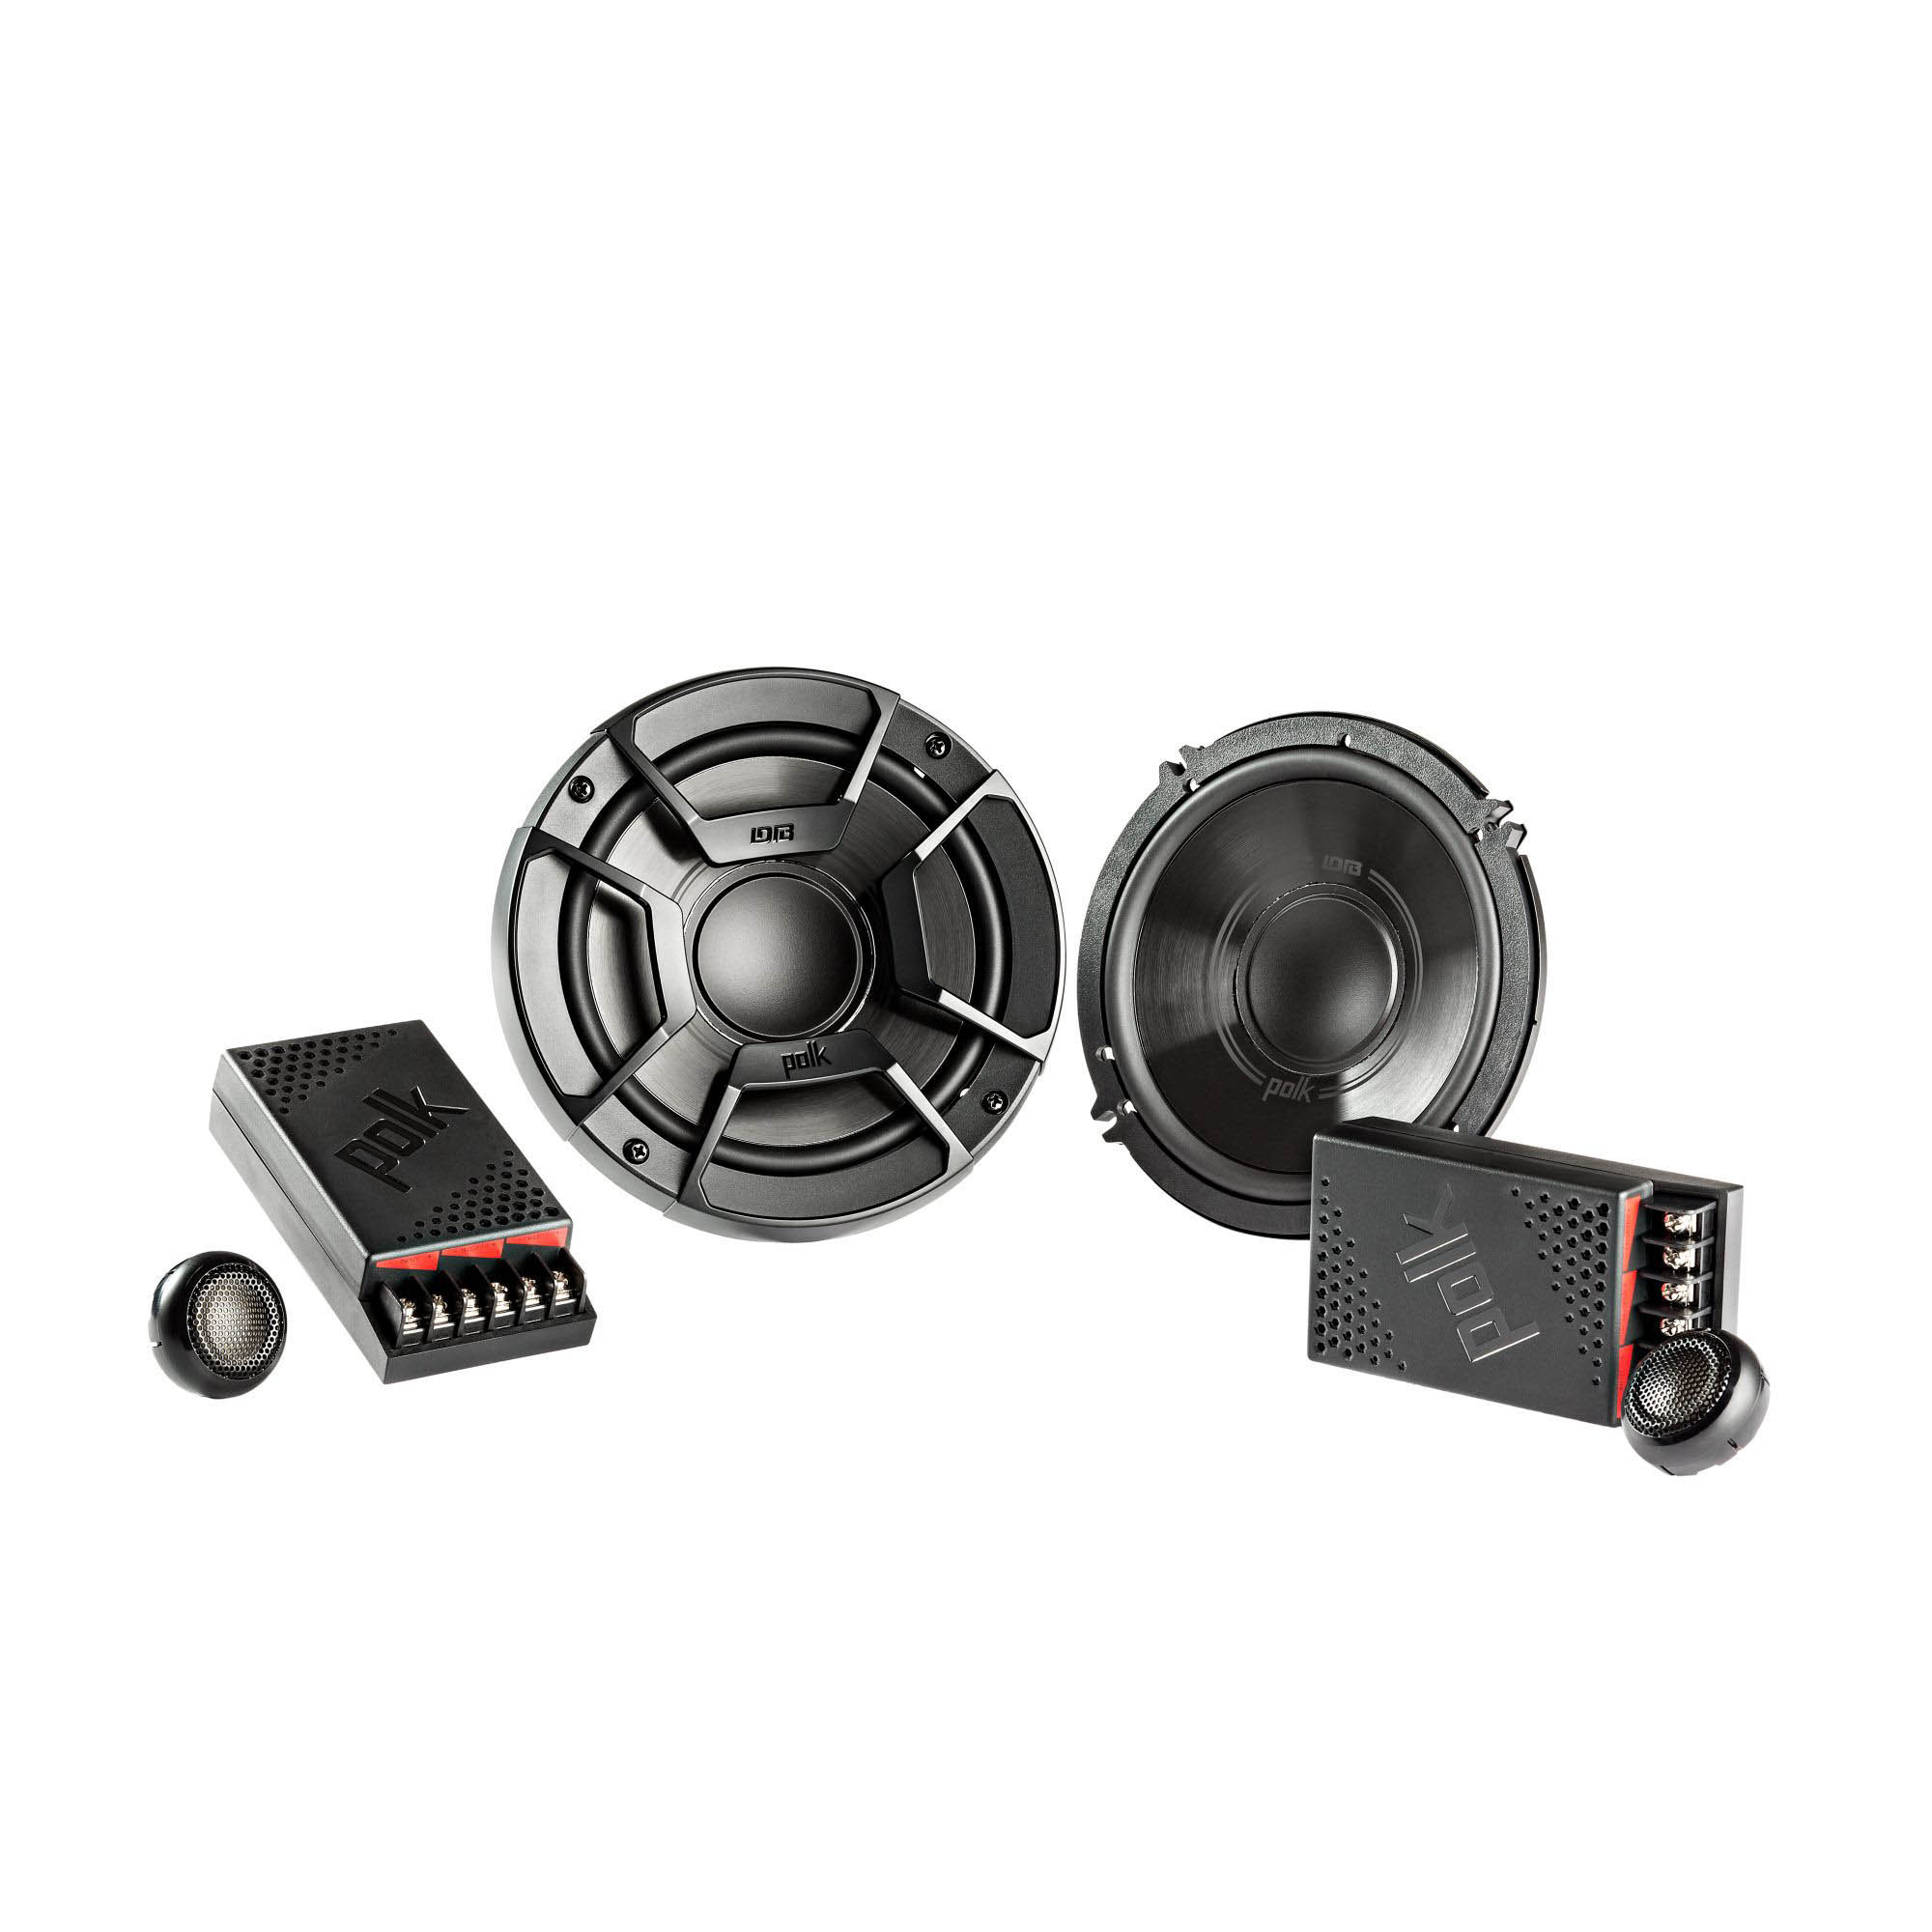 Polk Audio - A Pair Of DB6502 6.5" Components and A Pair Of DB572 5x7" Coax Speakers - Bundle Includes 2 Pair - image 2 of 7